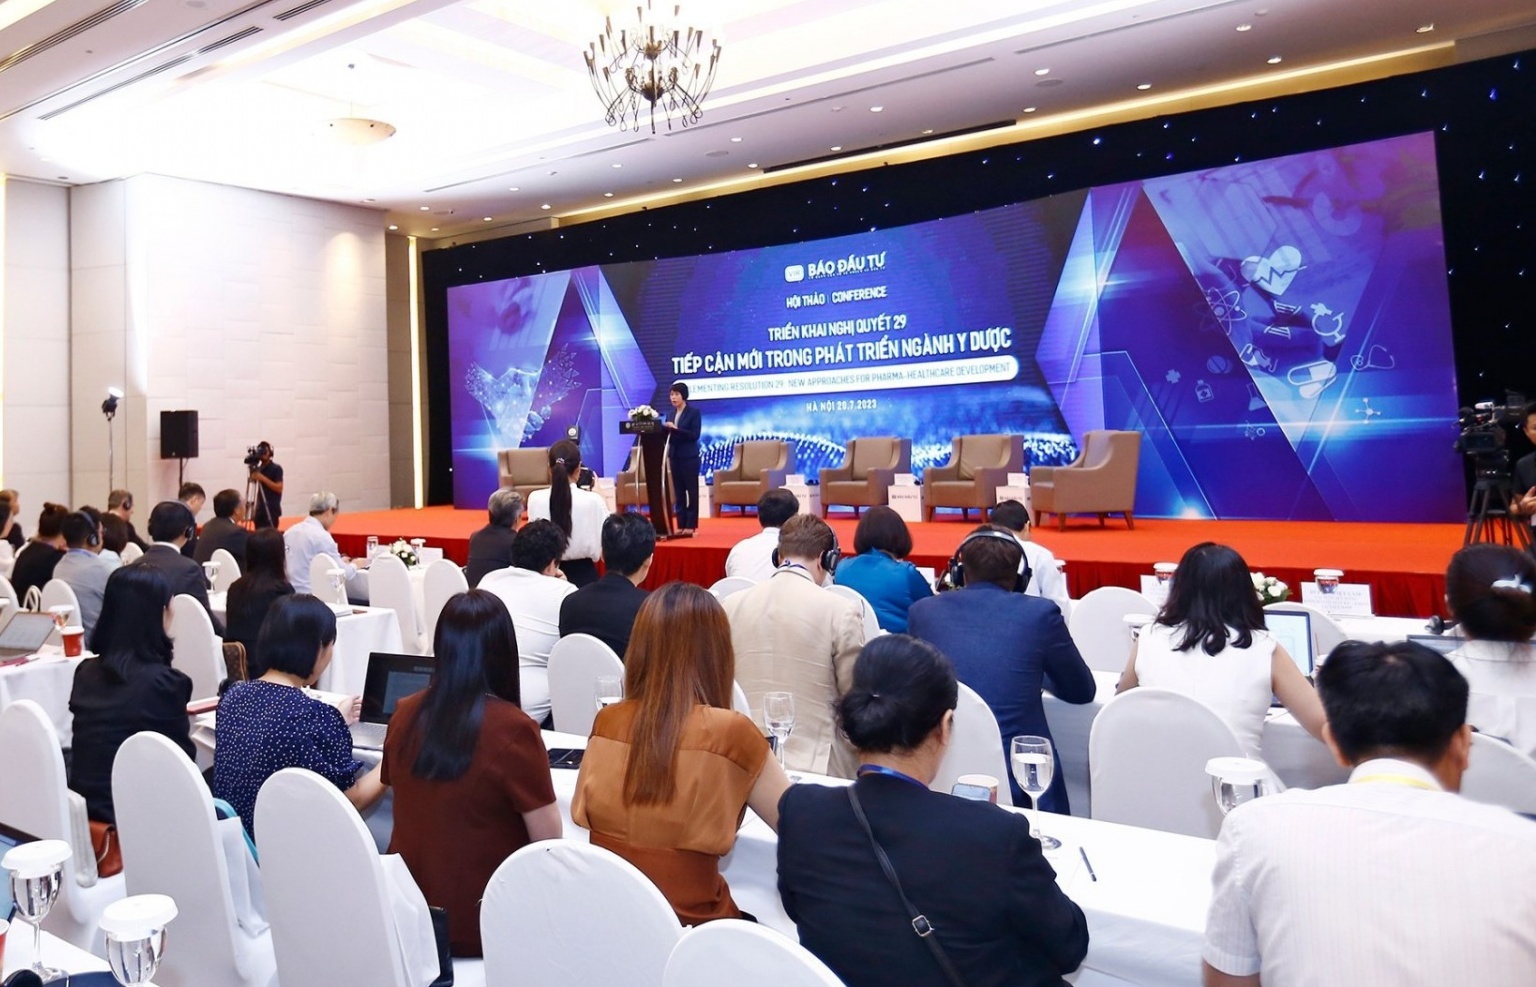 More than 200 participants join VIR's conference on pharma and medical sector